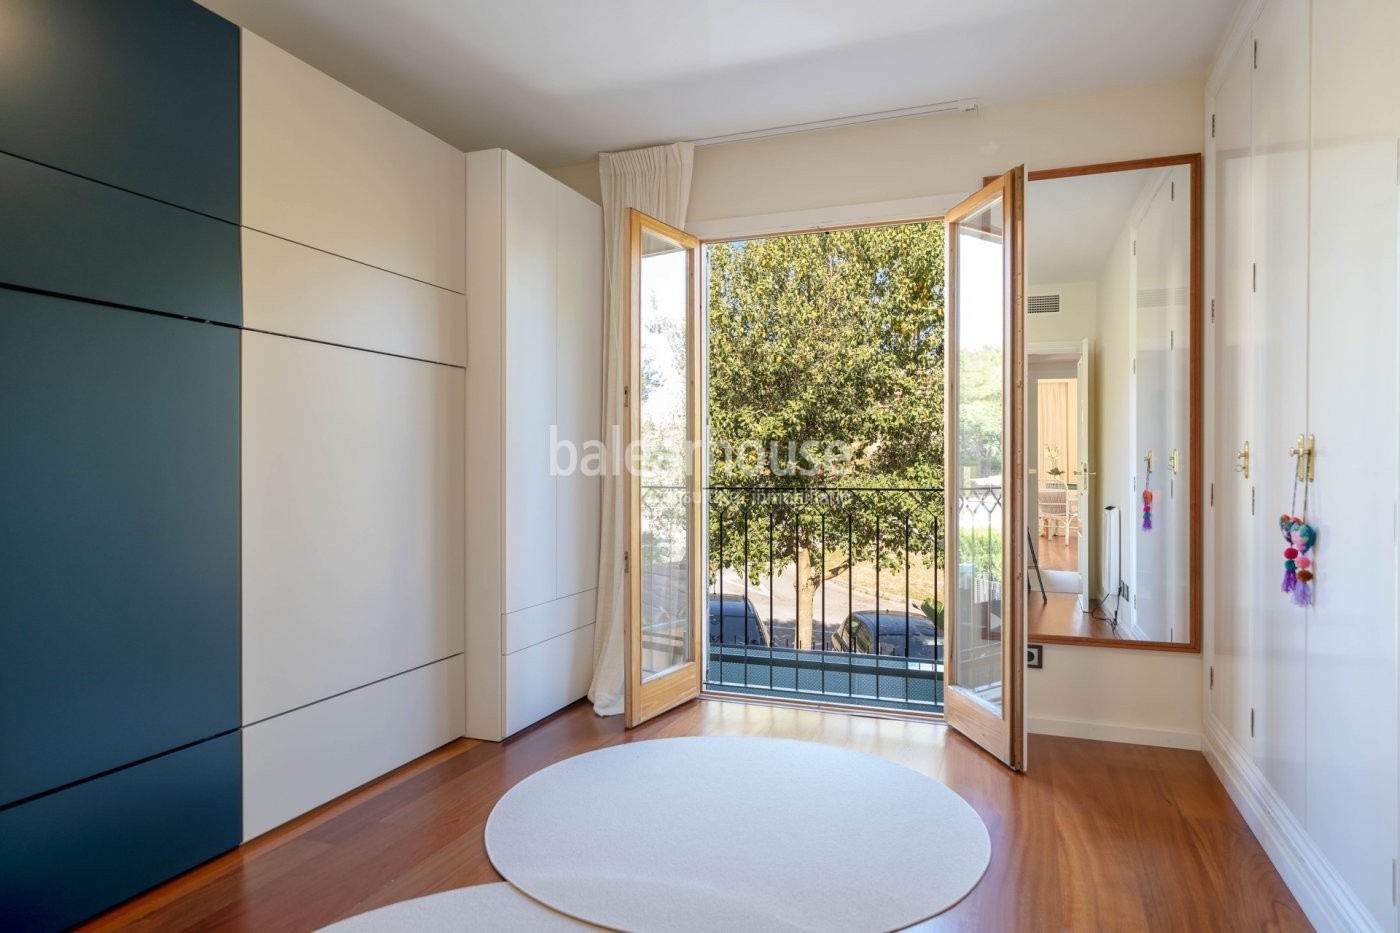 Large villa with modern light-filled spaces and extensive garden in the green lung of Palma.